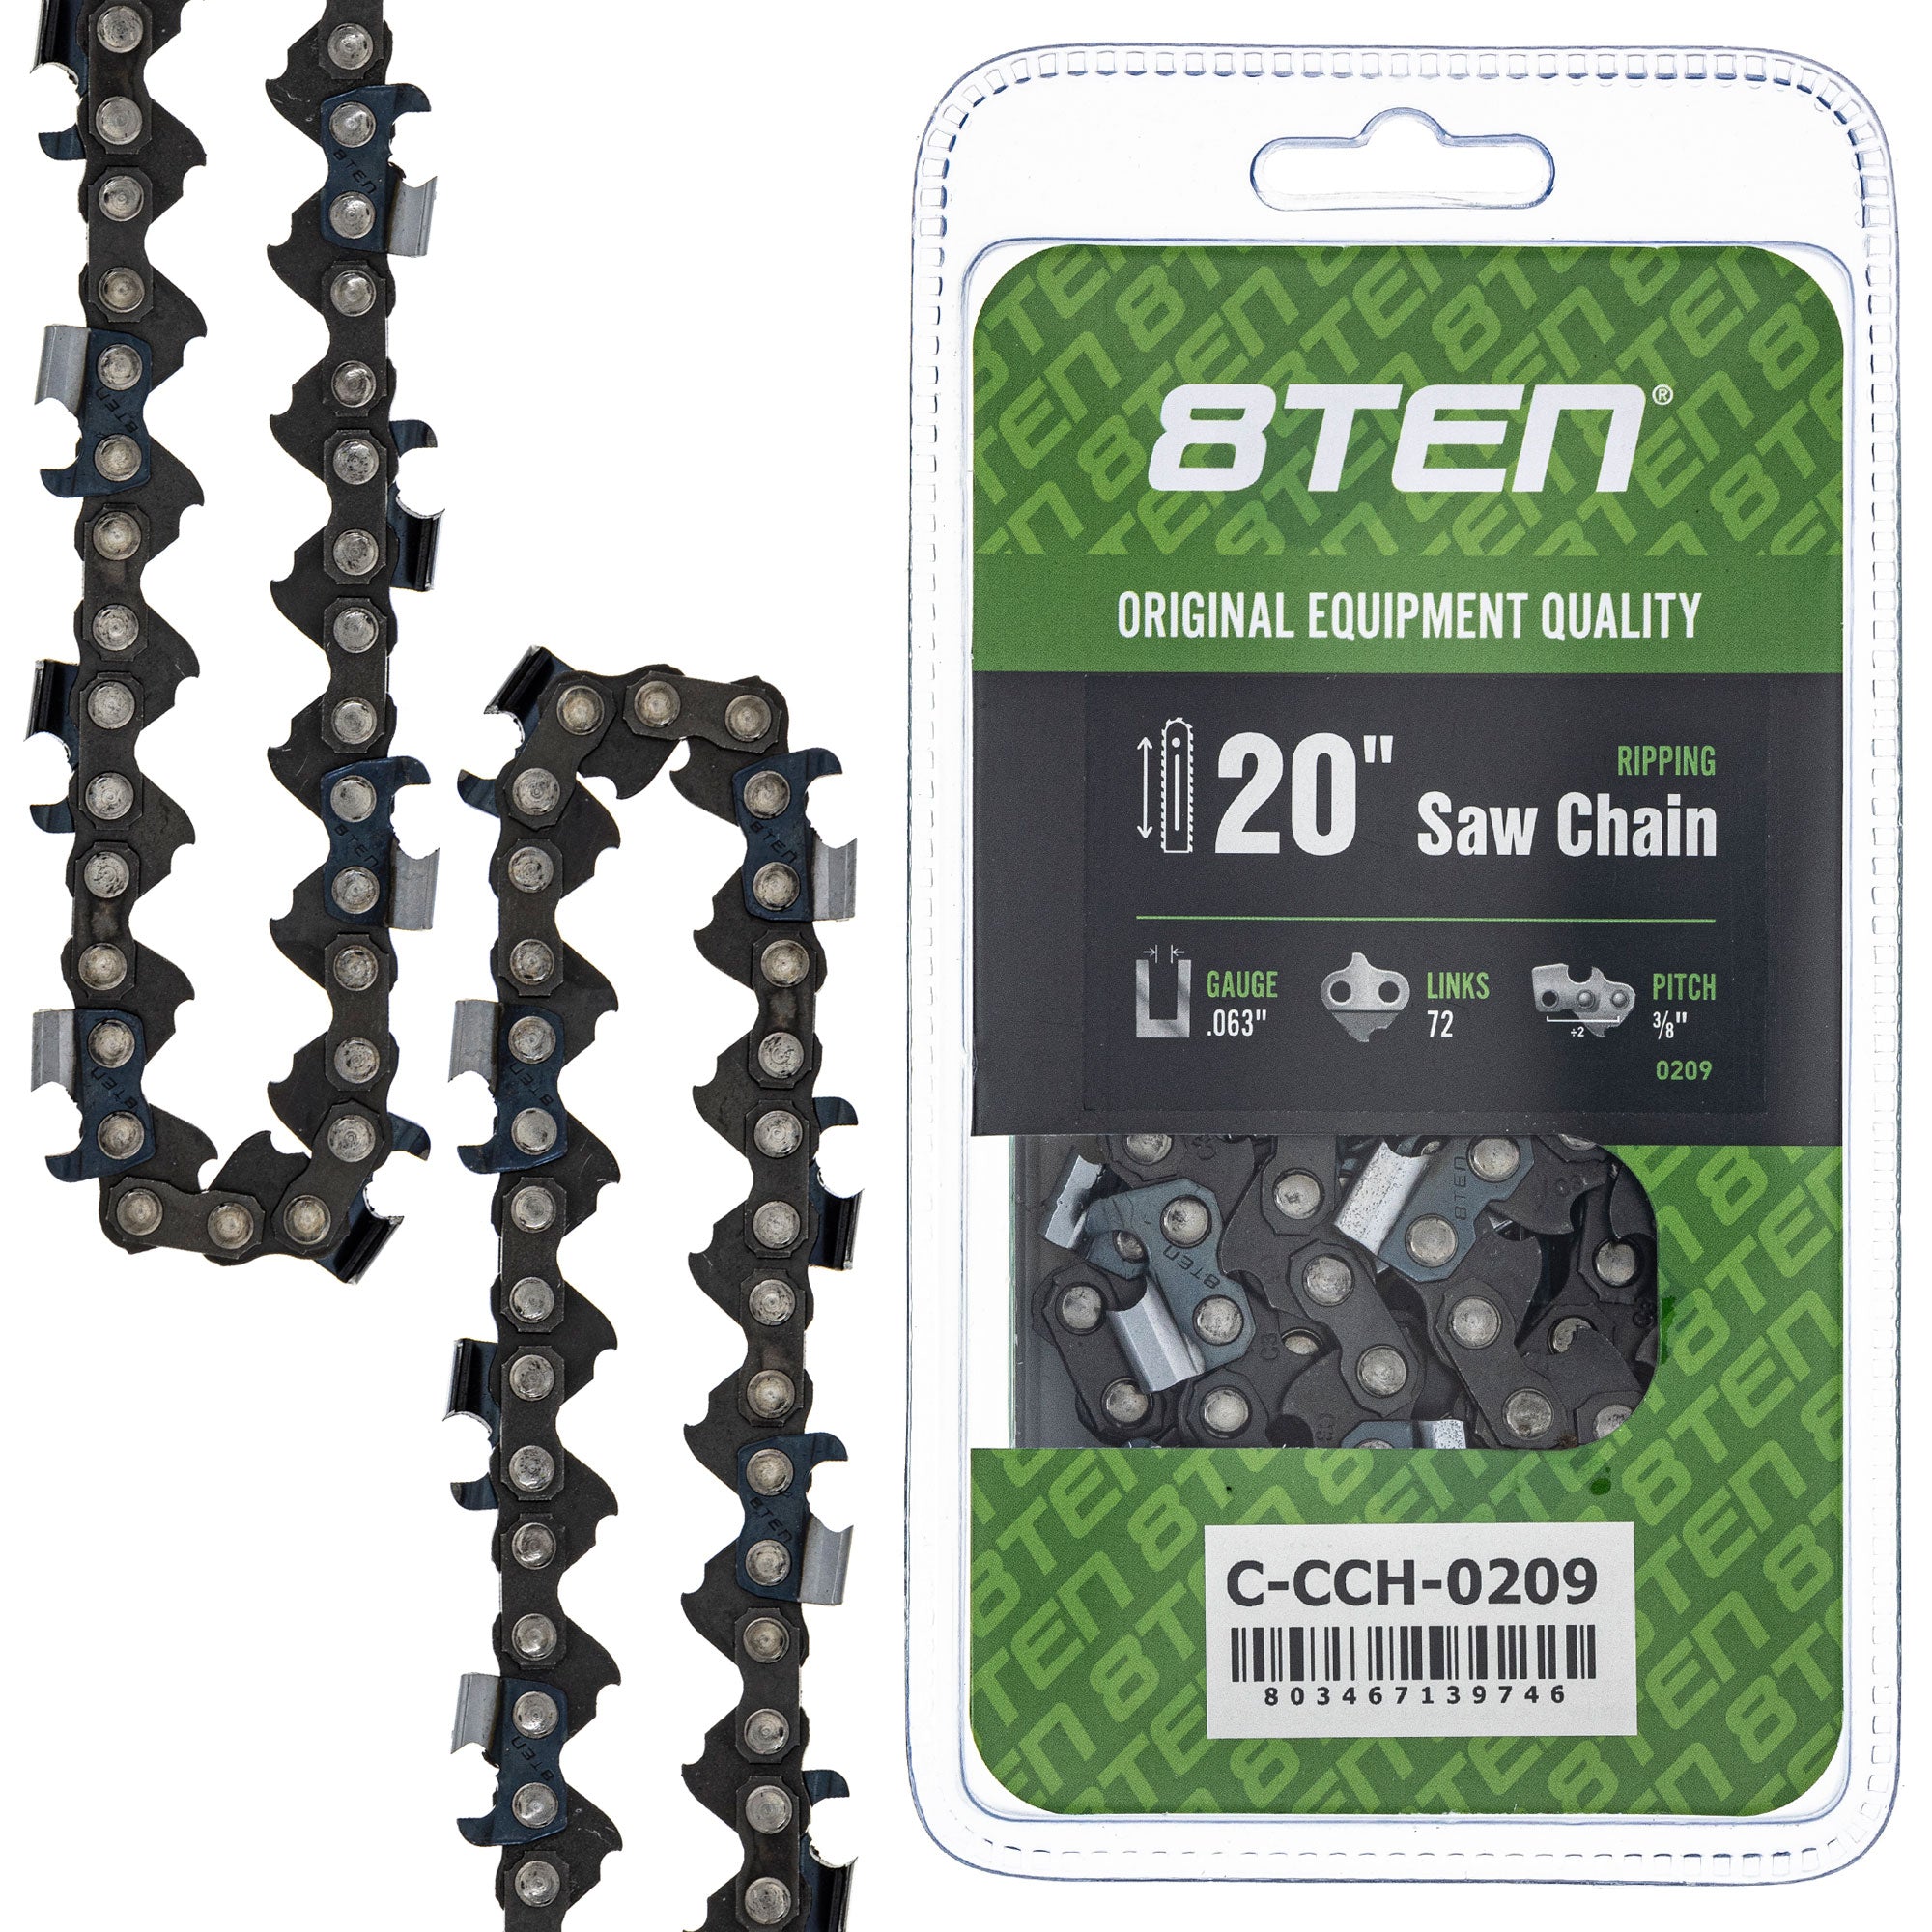 8TEN MK1010347 Guide Bar & Chain for MSE MS E 066